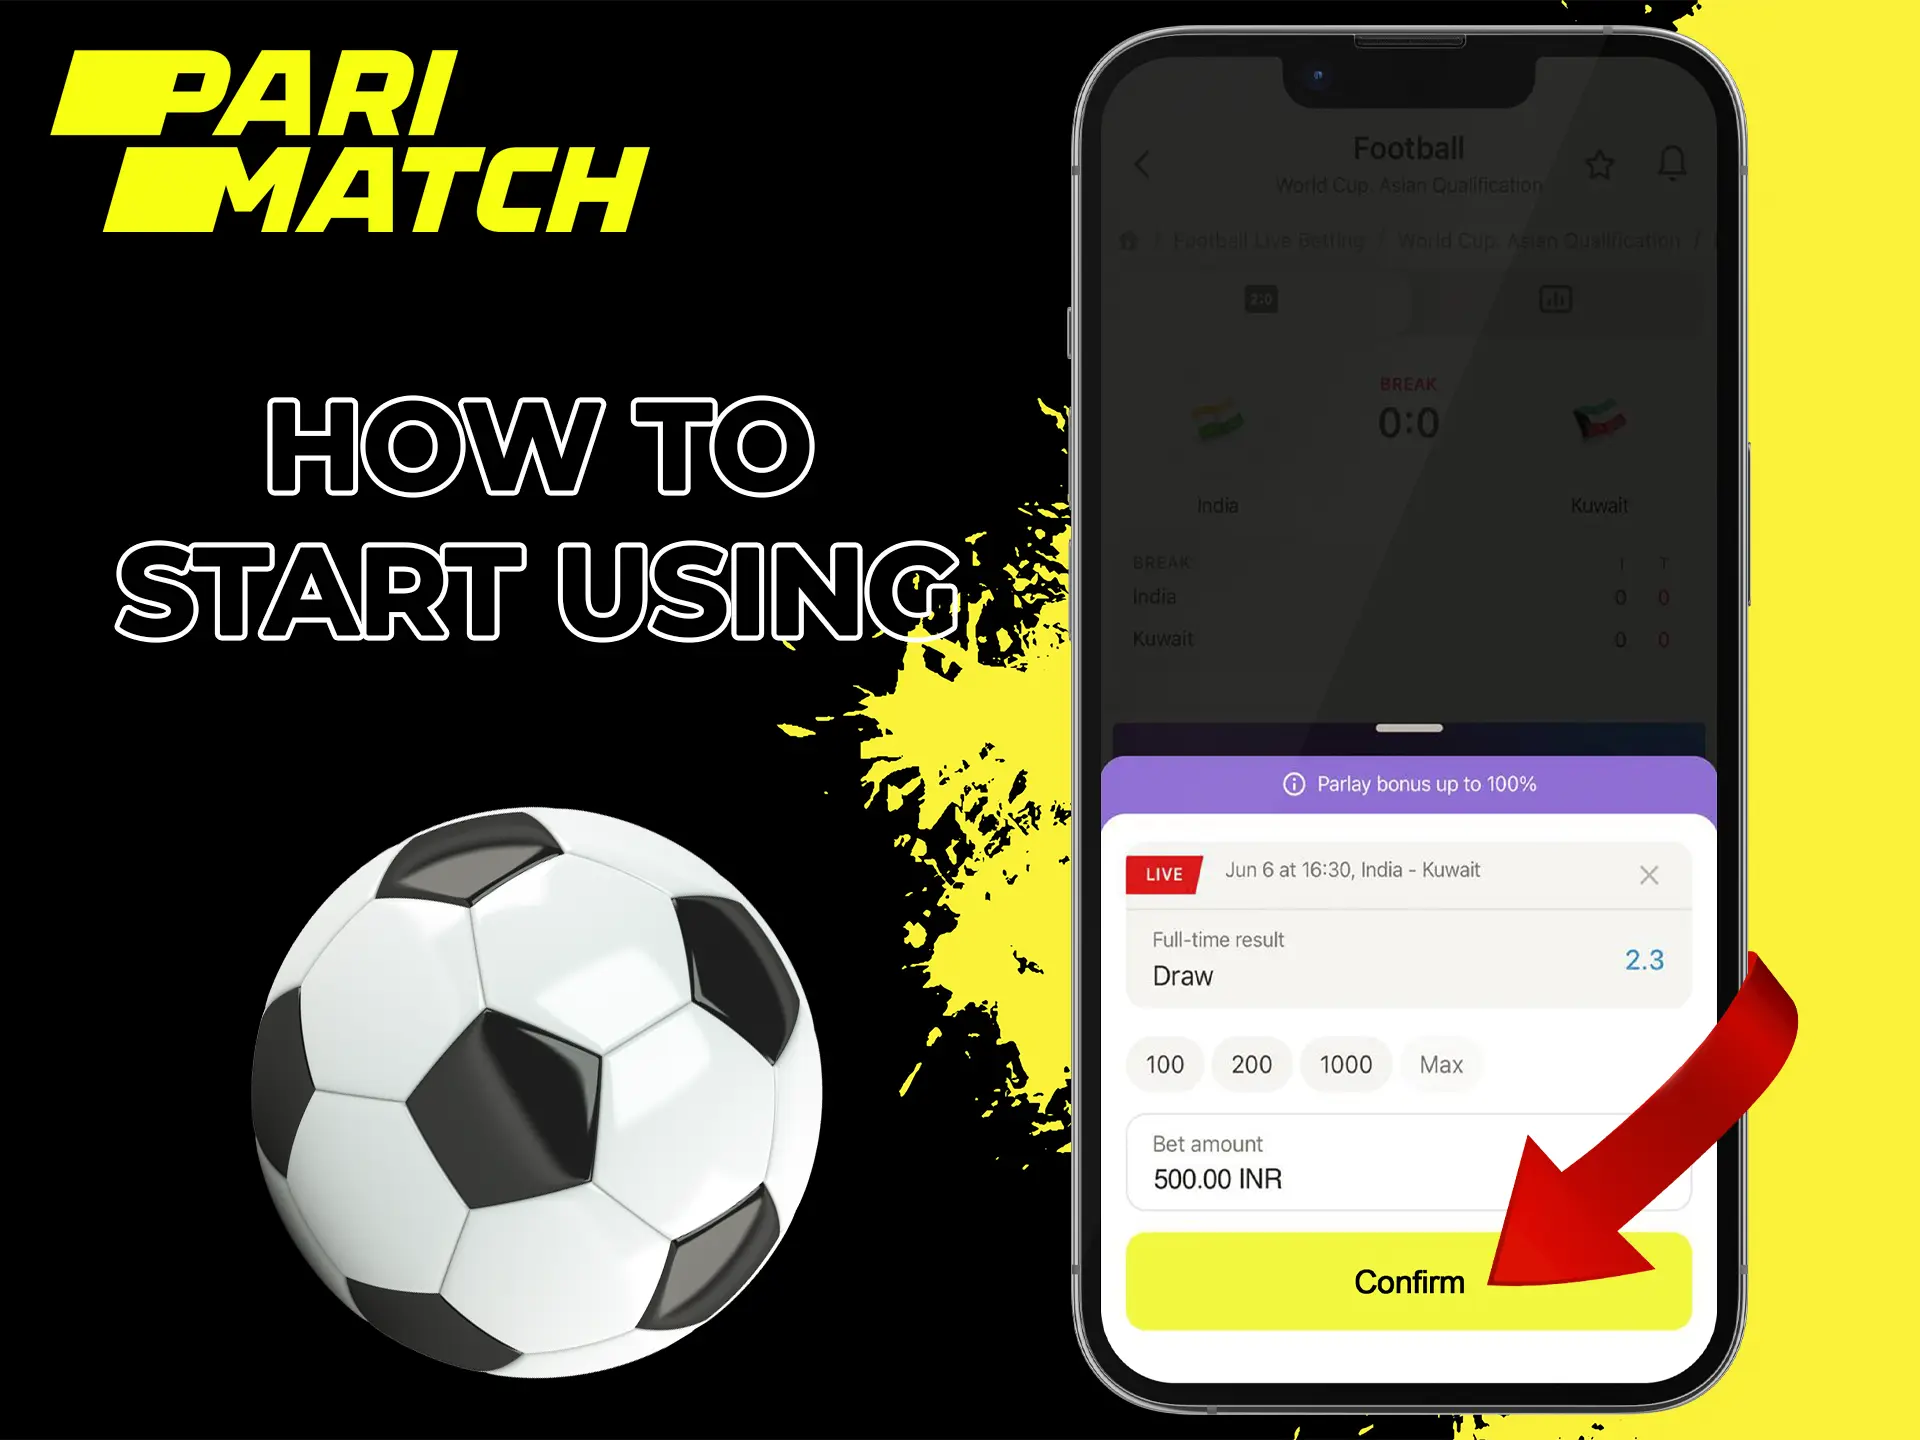 Register in the Parimatch app and immerse yourself in the world of betting and winning emotions.